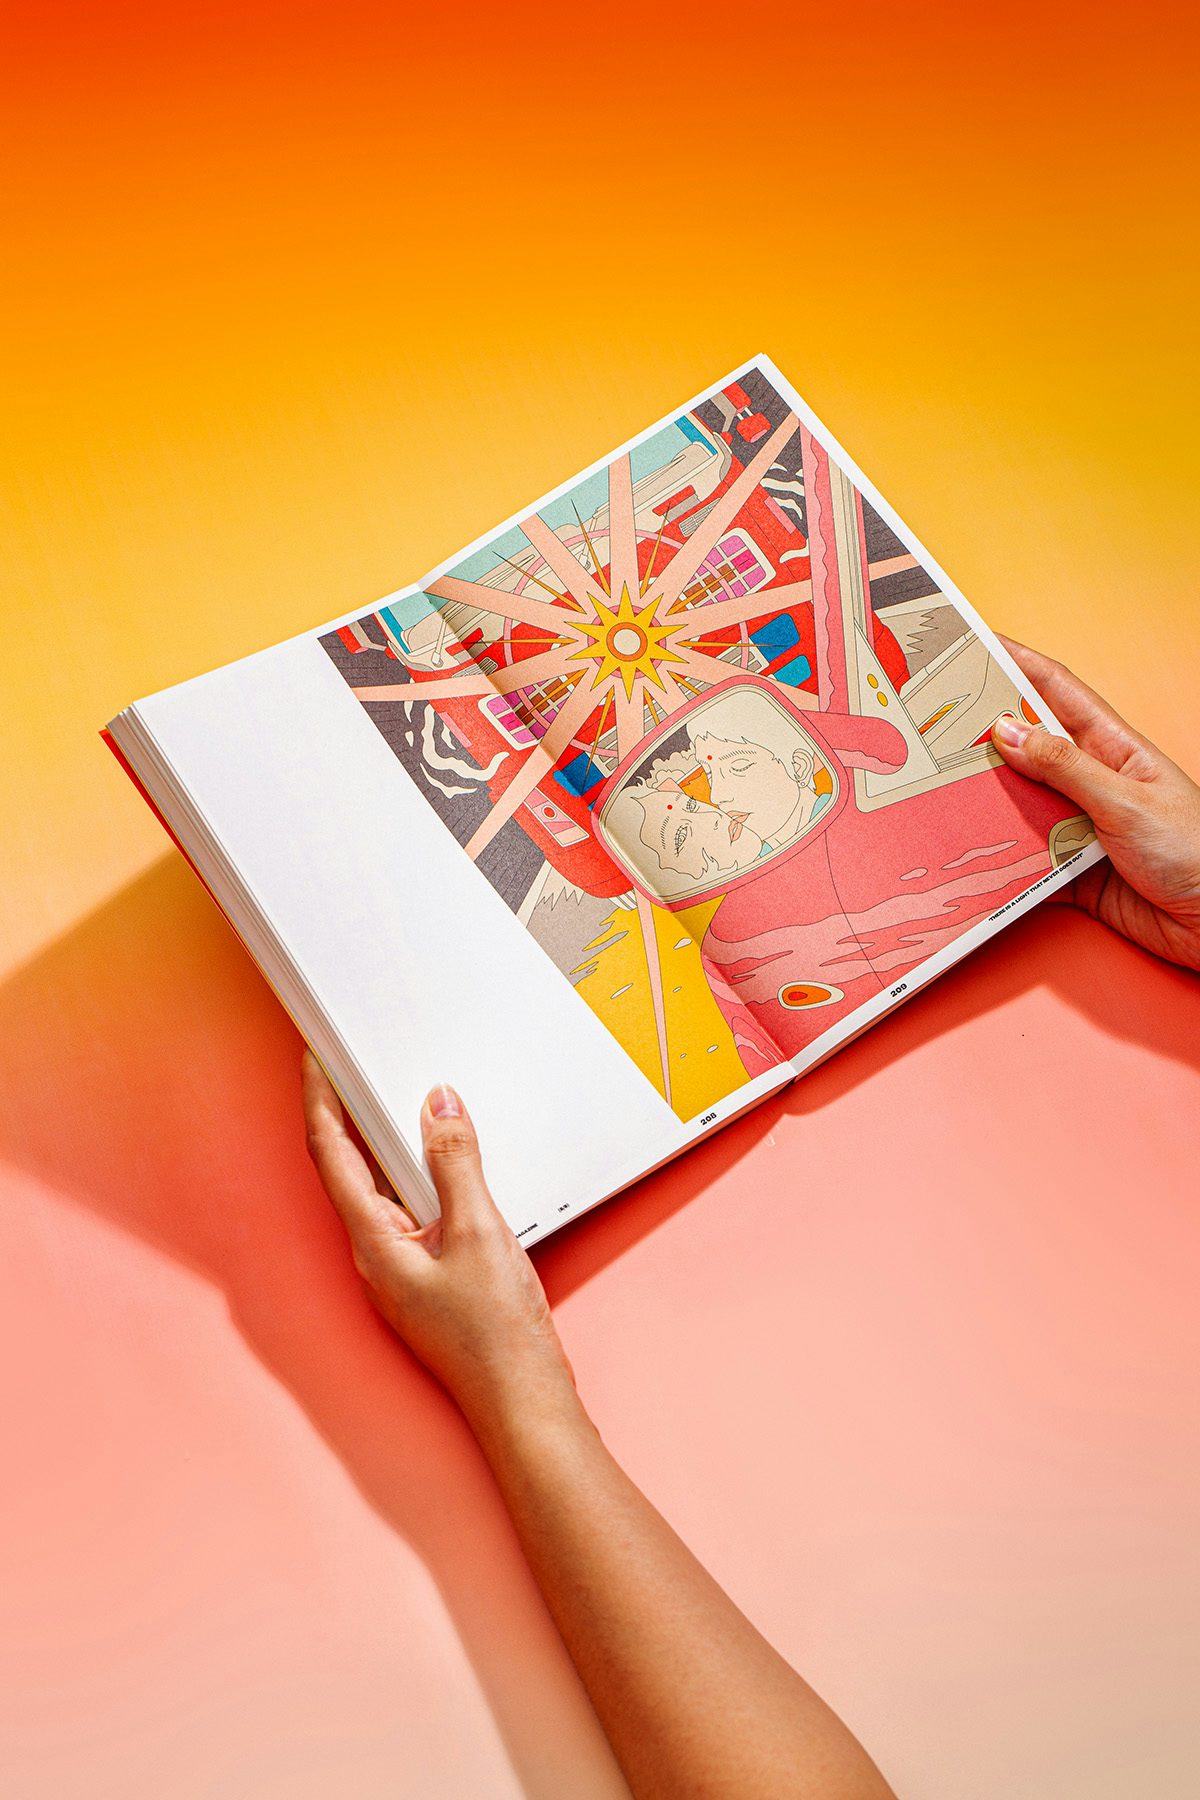 Photograph of a person holding Ardneks' book Coastalvision opened onto a page with a brightly coloured abstract illustration showing two figures reflected in a car wing mirror